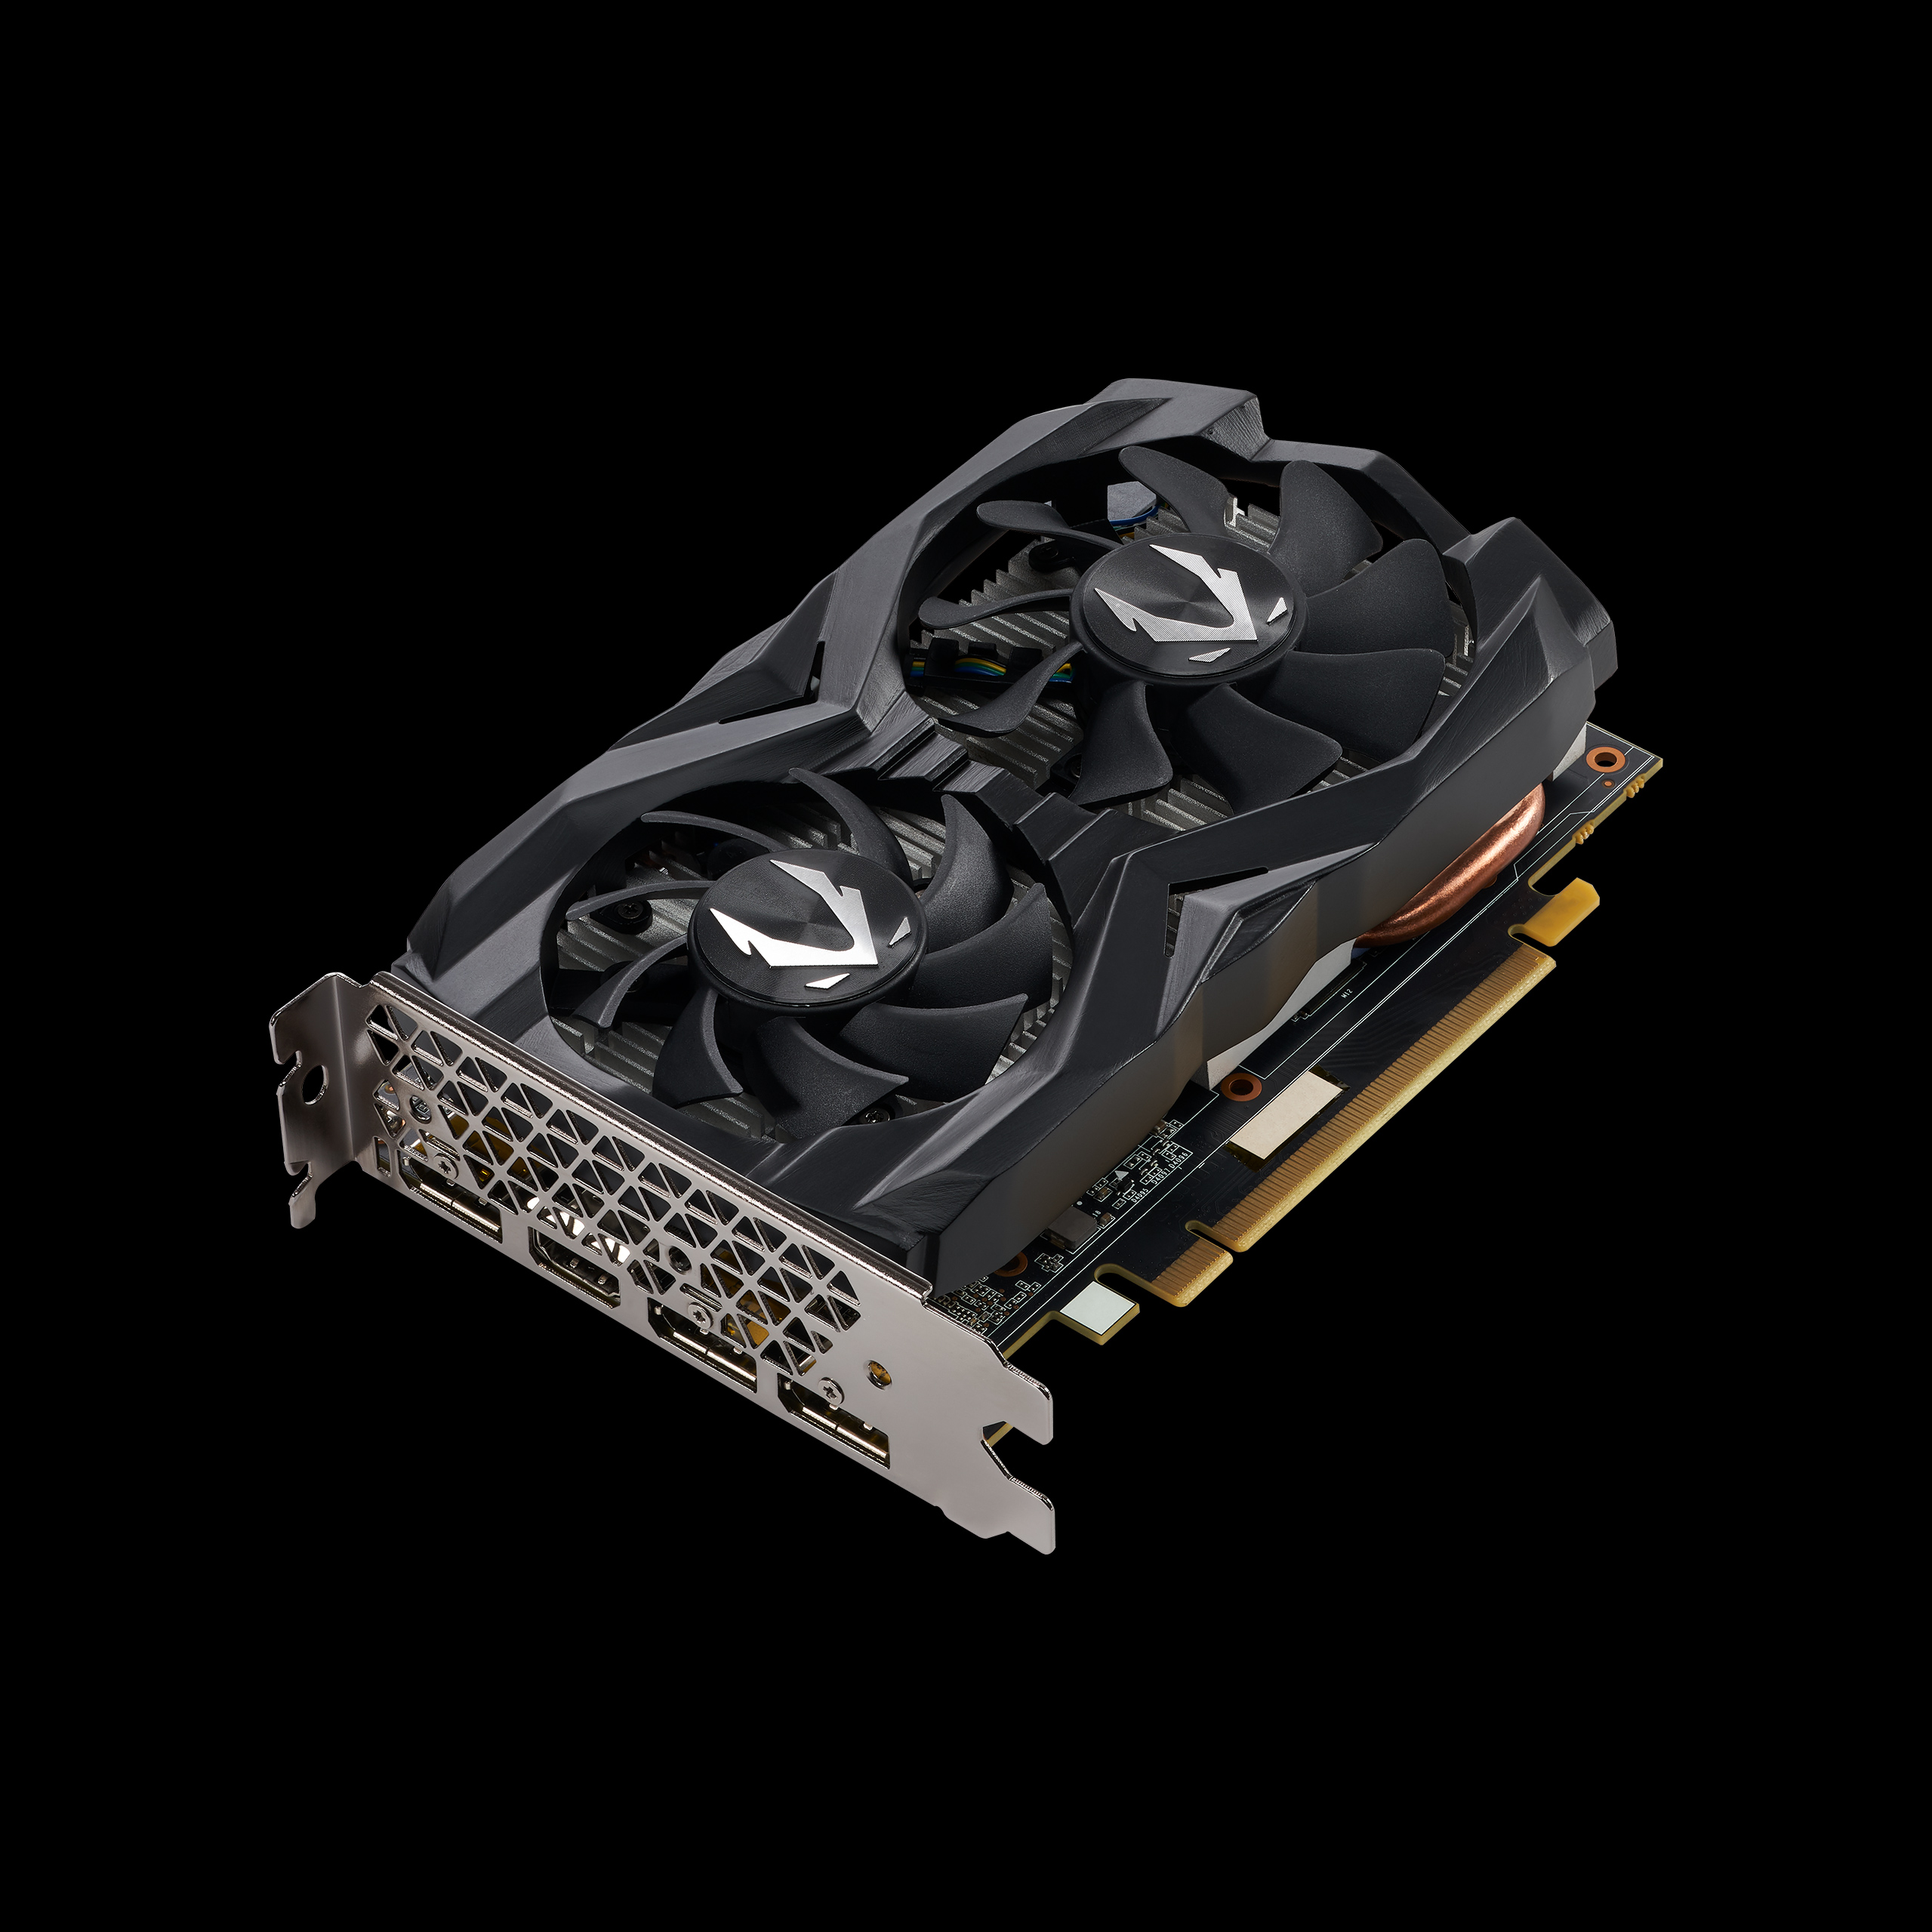 New Mid Range GeForce GTX Ti Cranks 120fps For Less | Blur Busters